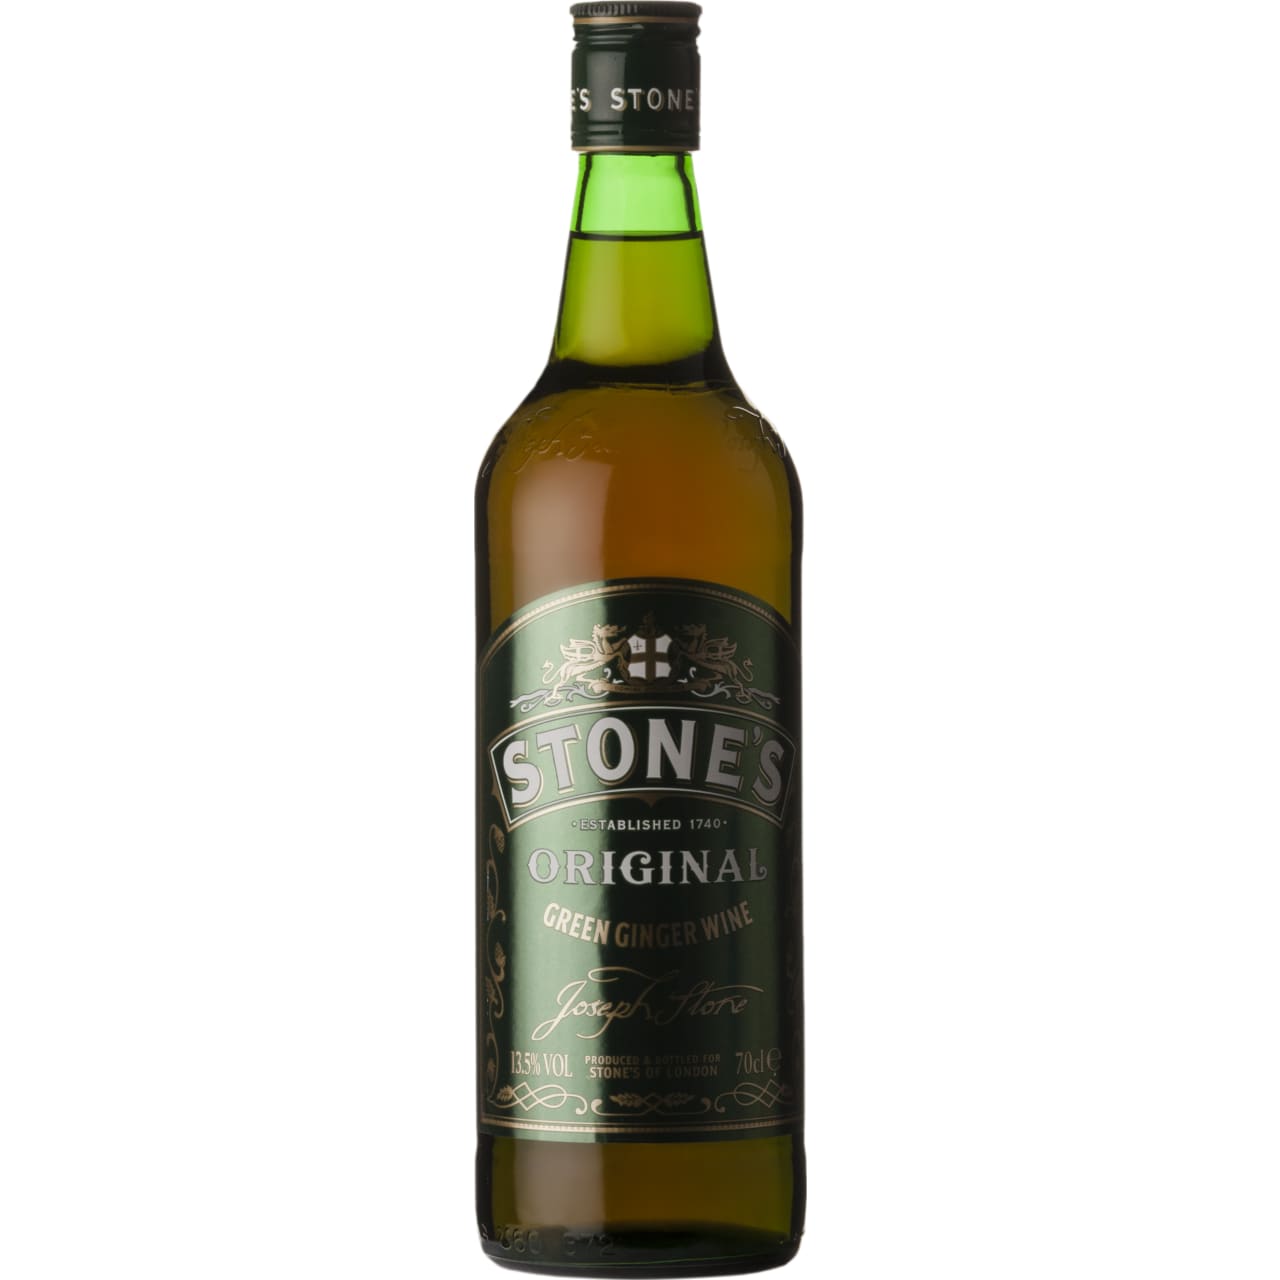 Stone’s very tasty and spicy original ginger wine from England, made using raisins and flavoured with ground ginger.